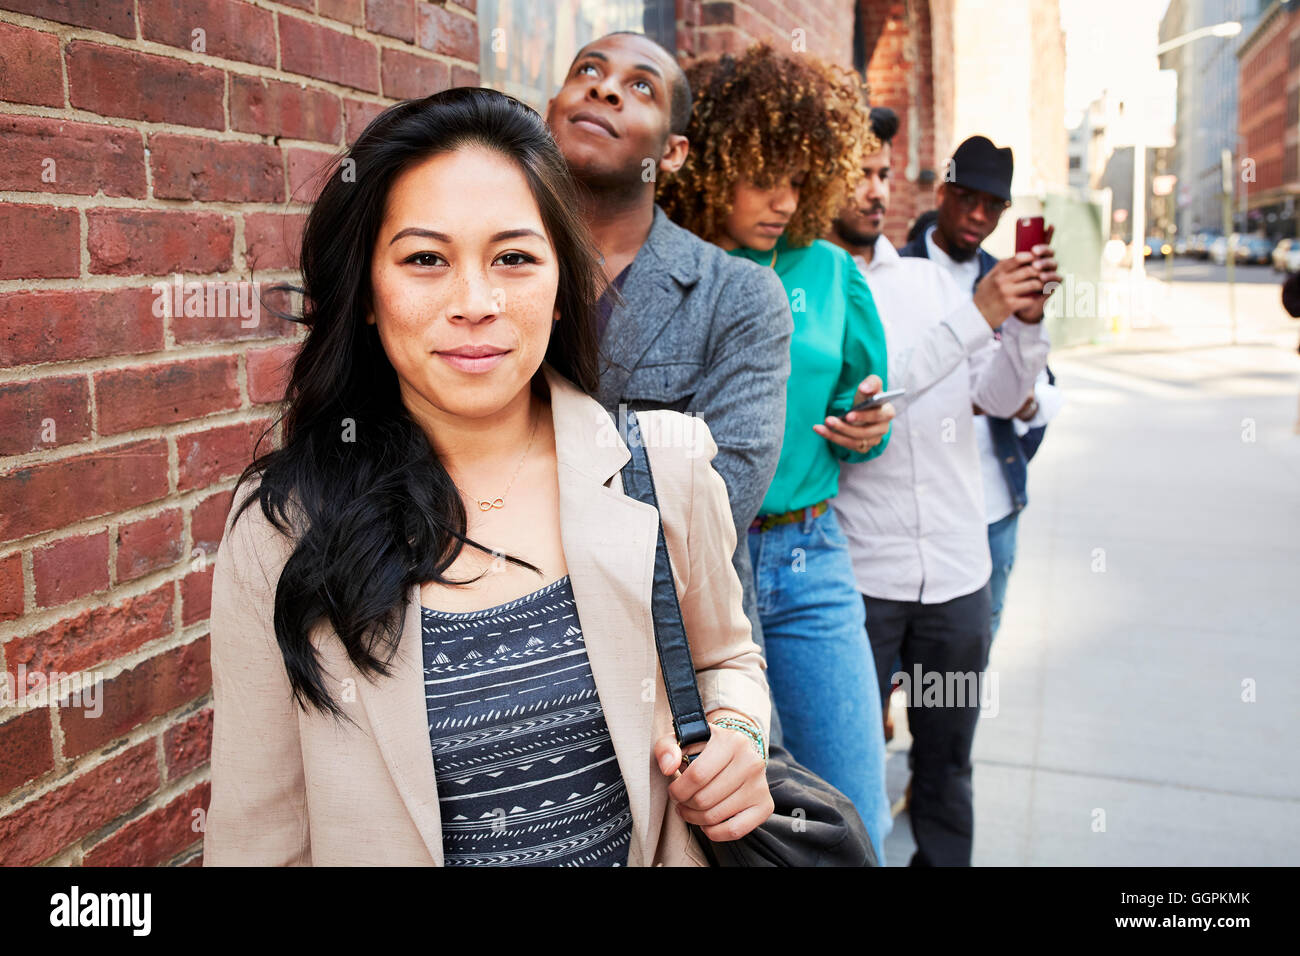 People waiting in line on sidewalk with cell phones Stock Photo